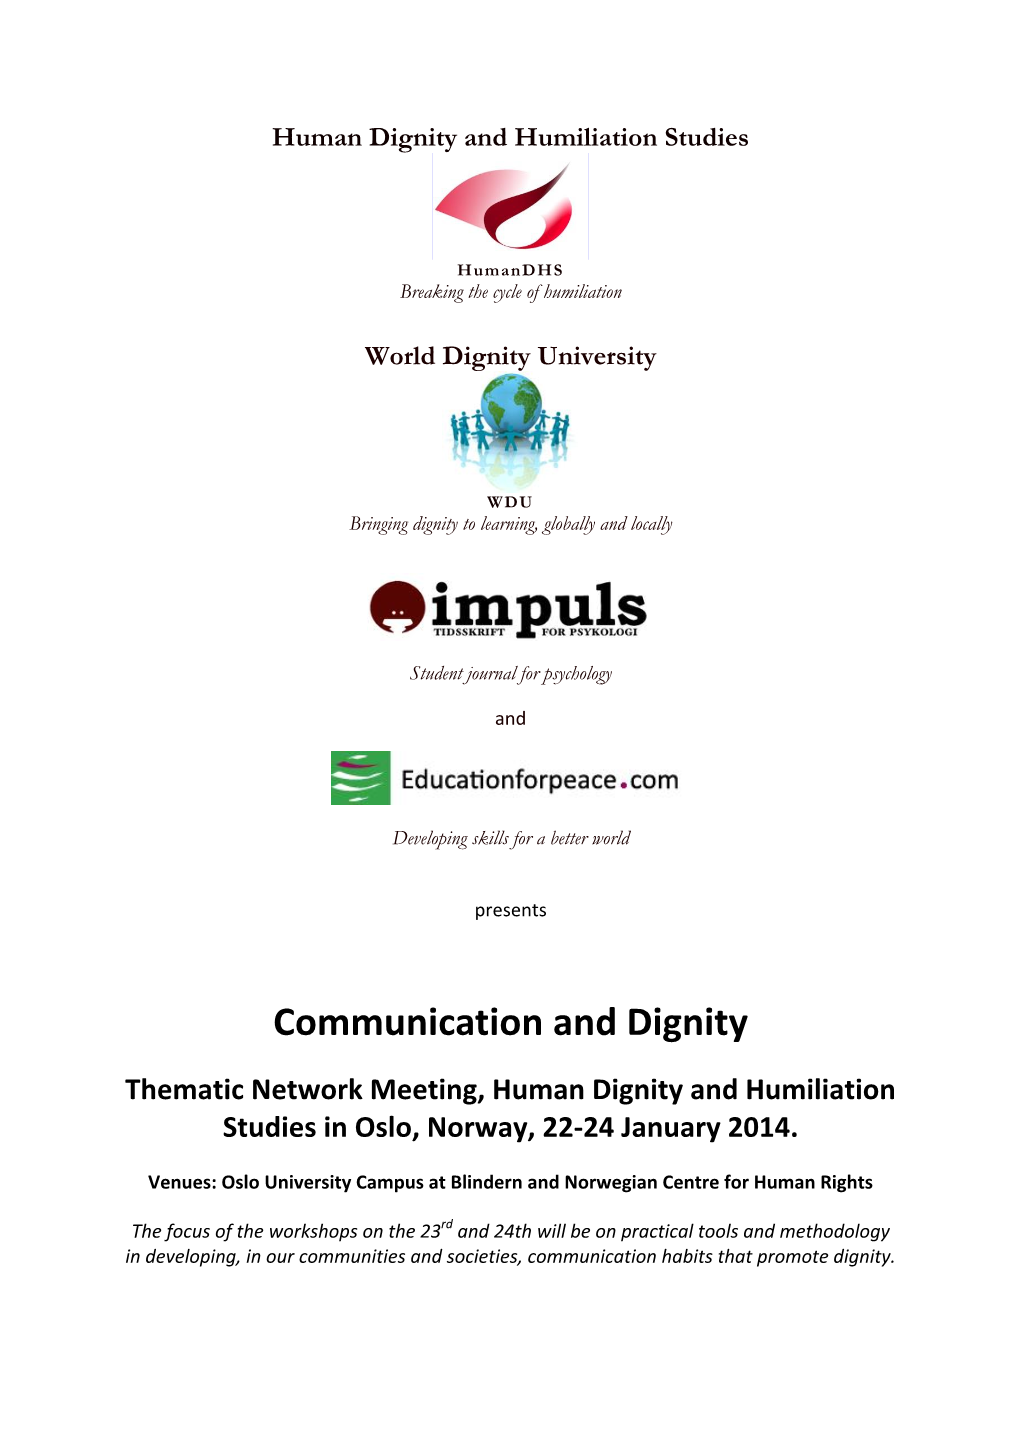 Communication and Dignity Thematic Network Meeting, Human Dignity and Humiliation Studies in Oslo, Norway, 22-24 January 2014